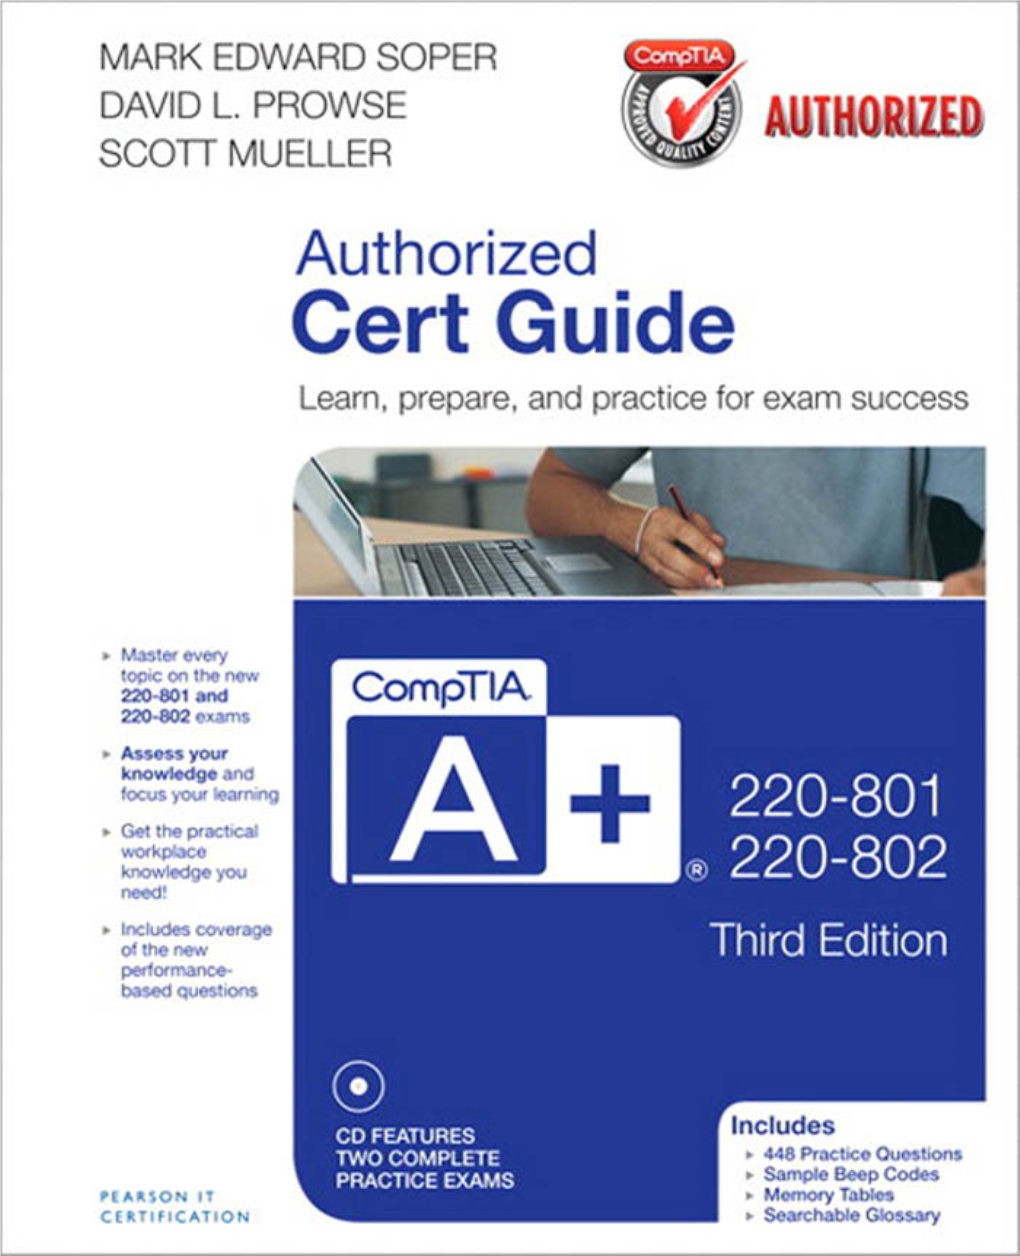 Comptia A+ 220-801 and 220-802 Authorized Cert Guide Third Edition